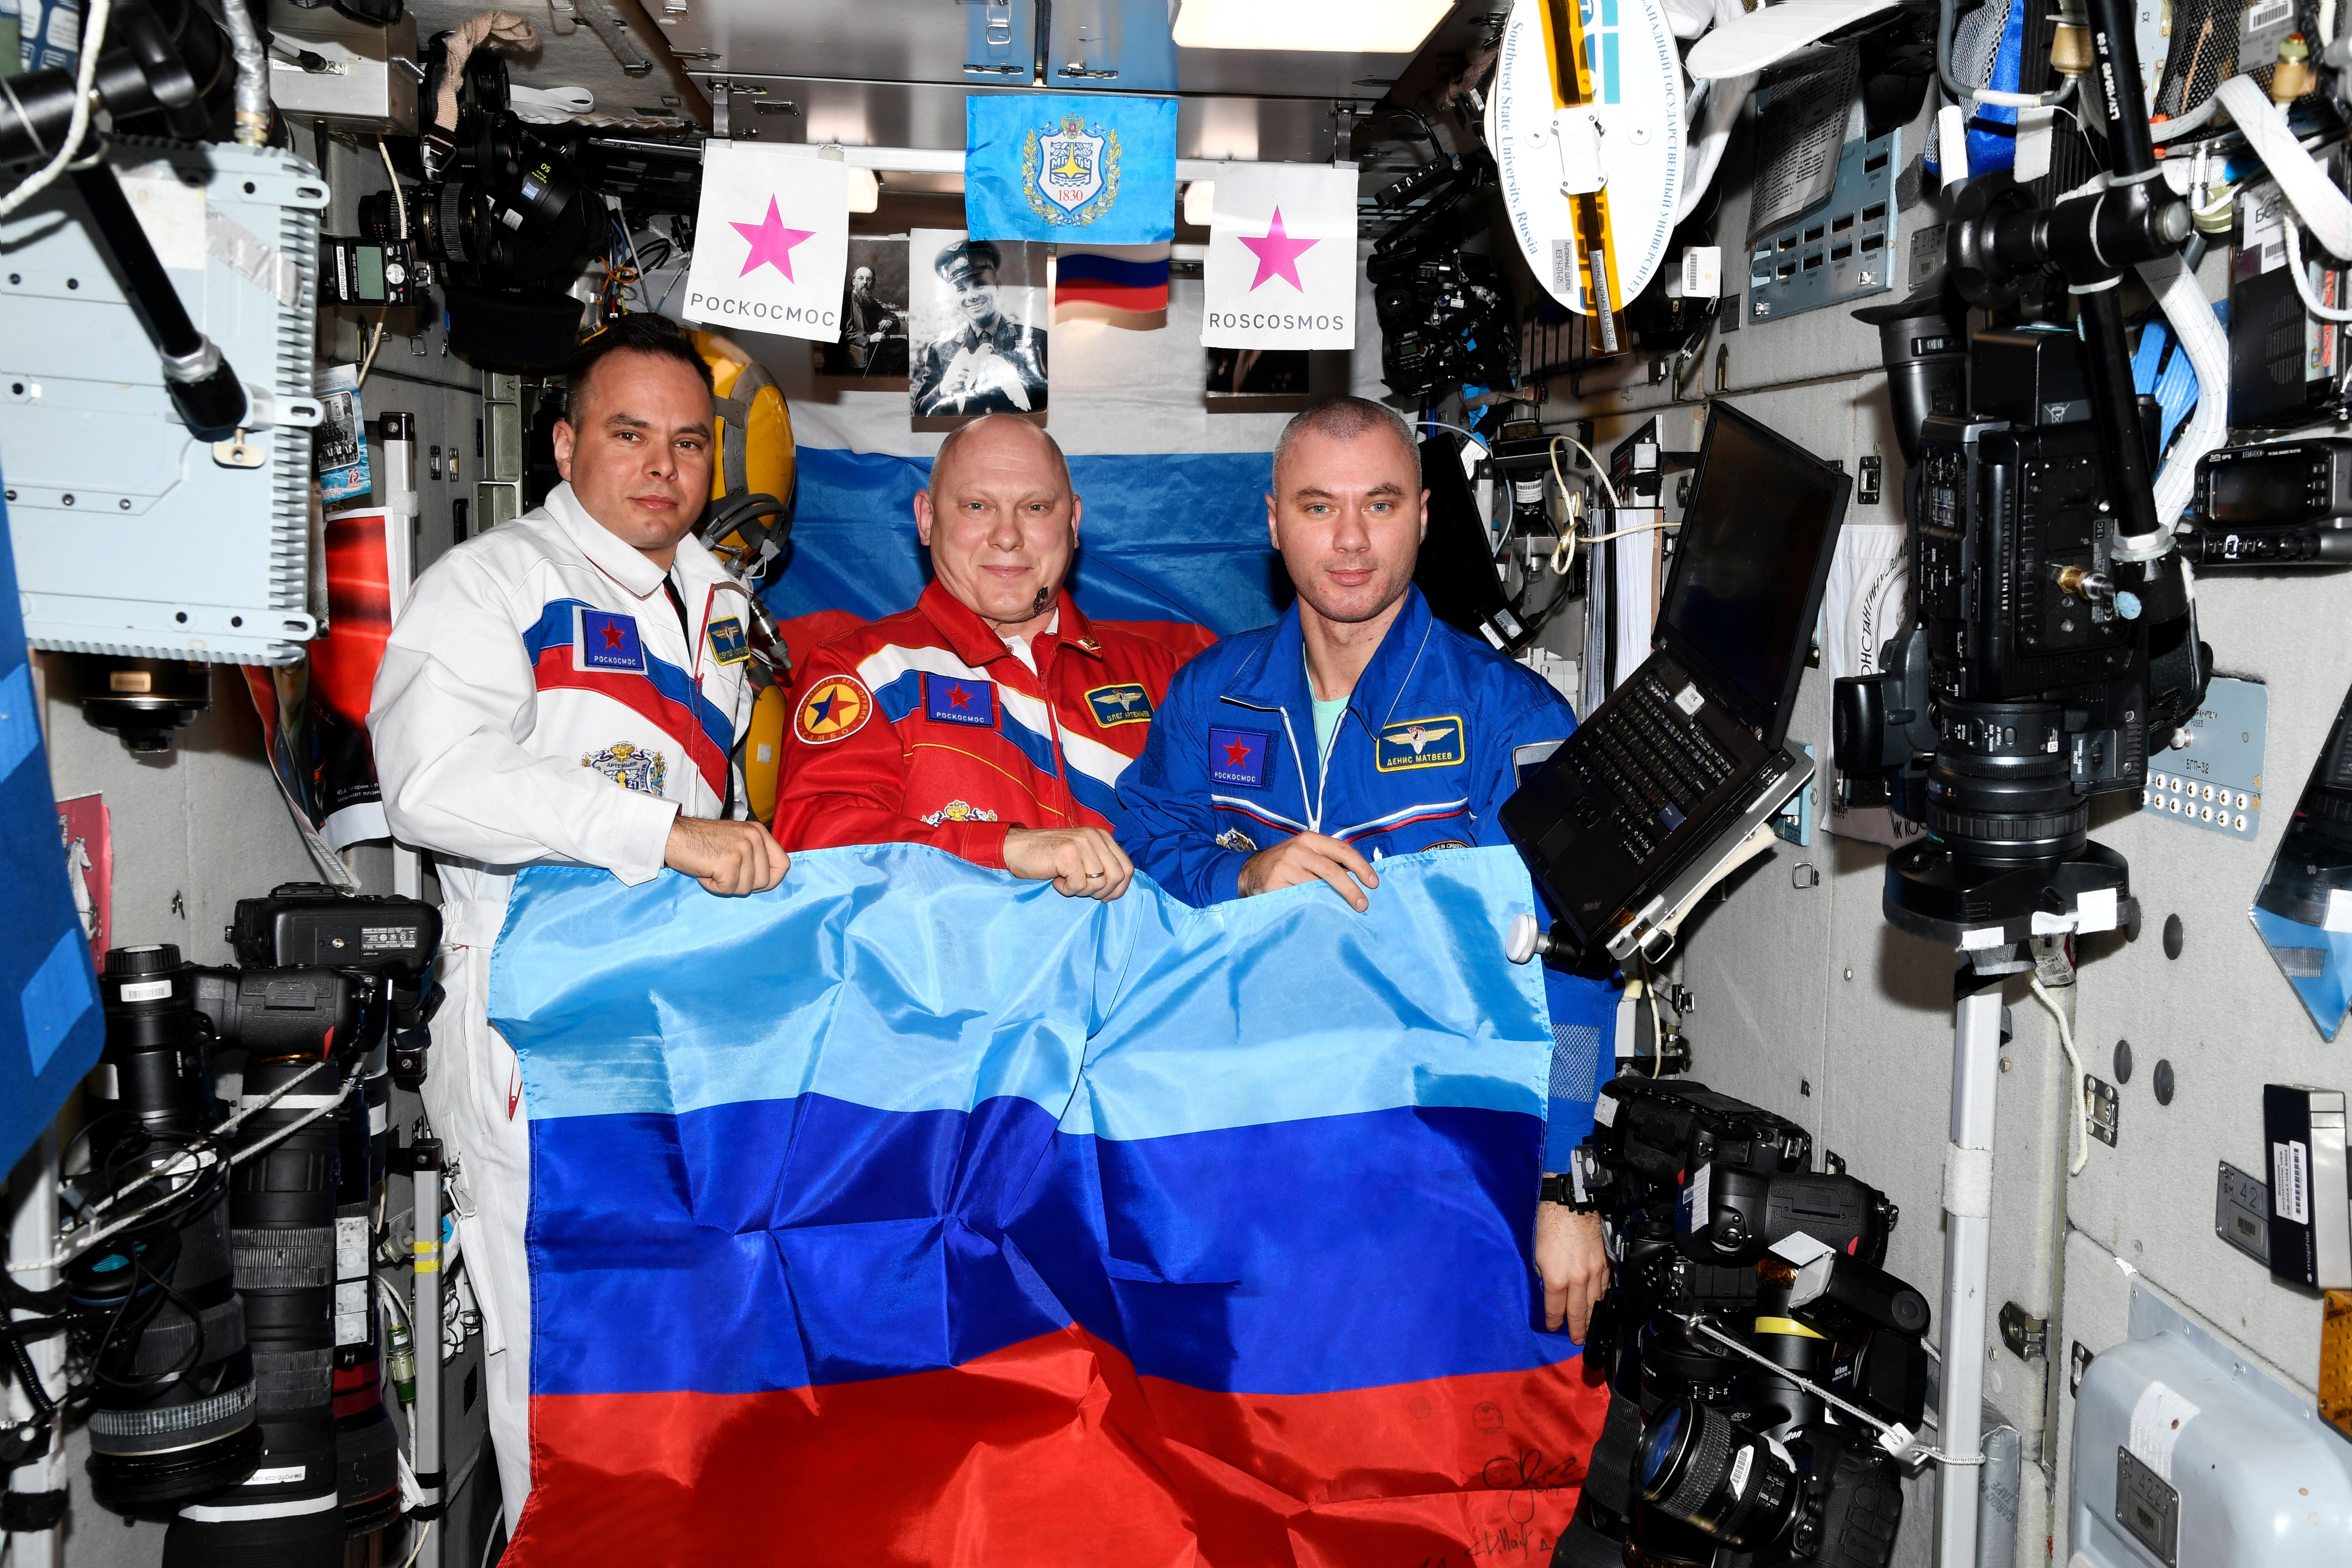 Russian cosmonauts Oleg Artemyev, Denis Matveev and Sergey Korsakov pose with the flag of the Lugansk People's Republic on the International Space Station (ISS) in this photo released July 4, 2022 (Roscosmos/REUTERS)